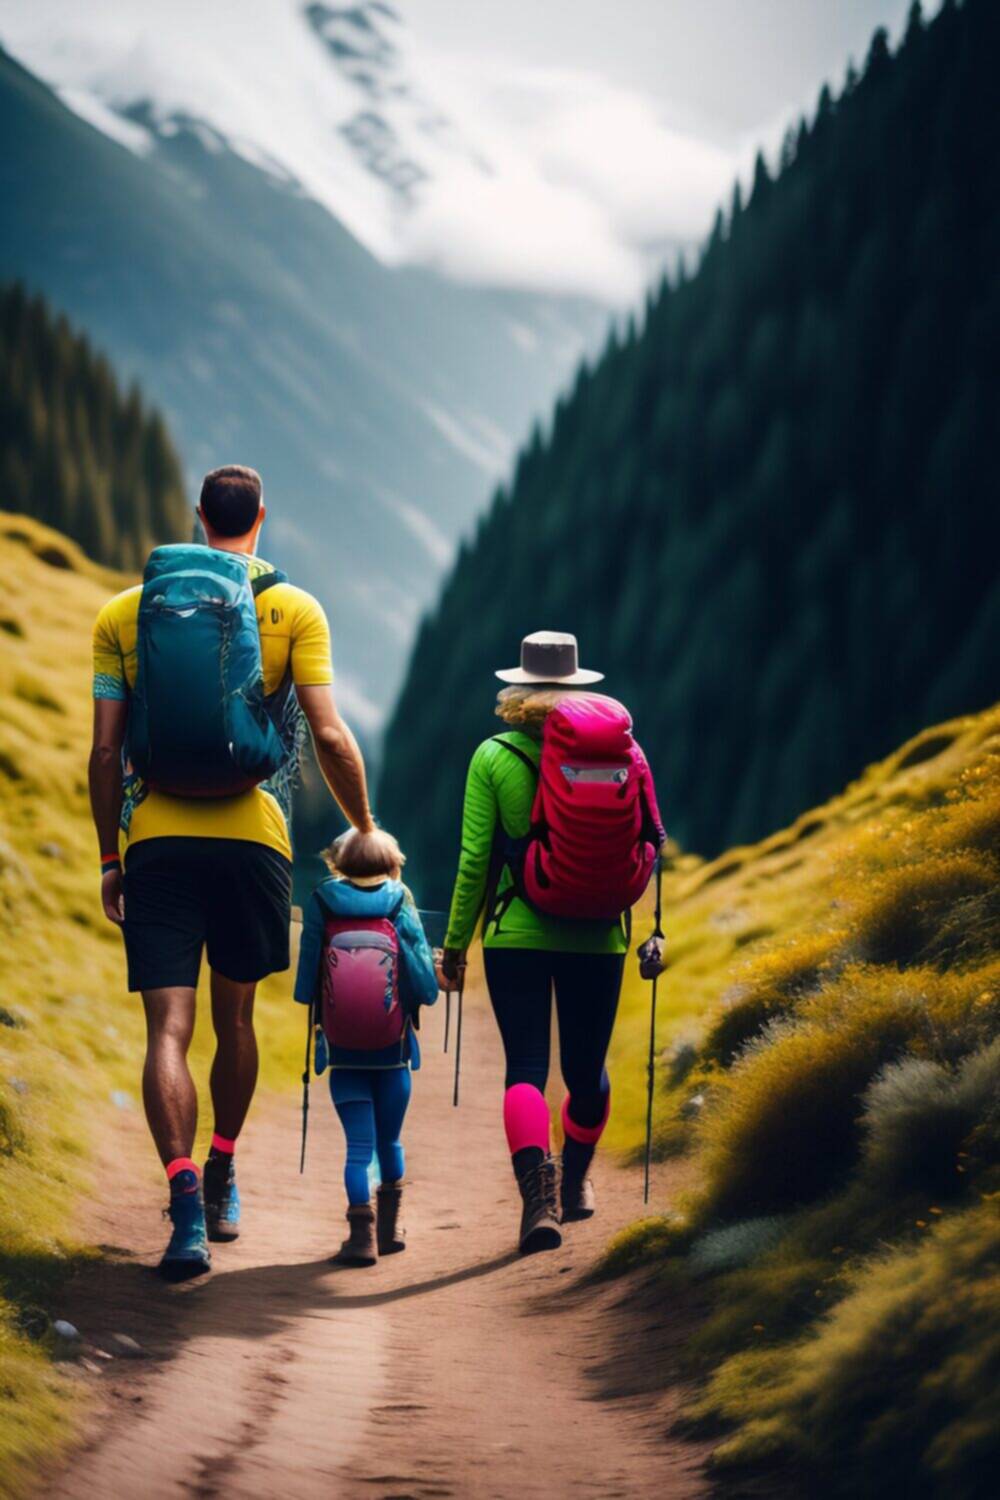 The Family-Friendly Spots for Scenic Hiking in 2023